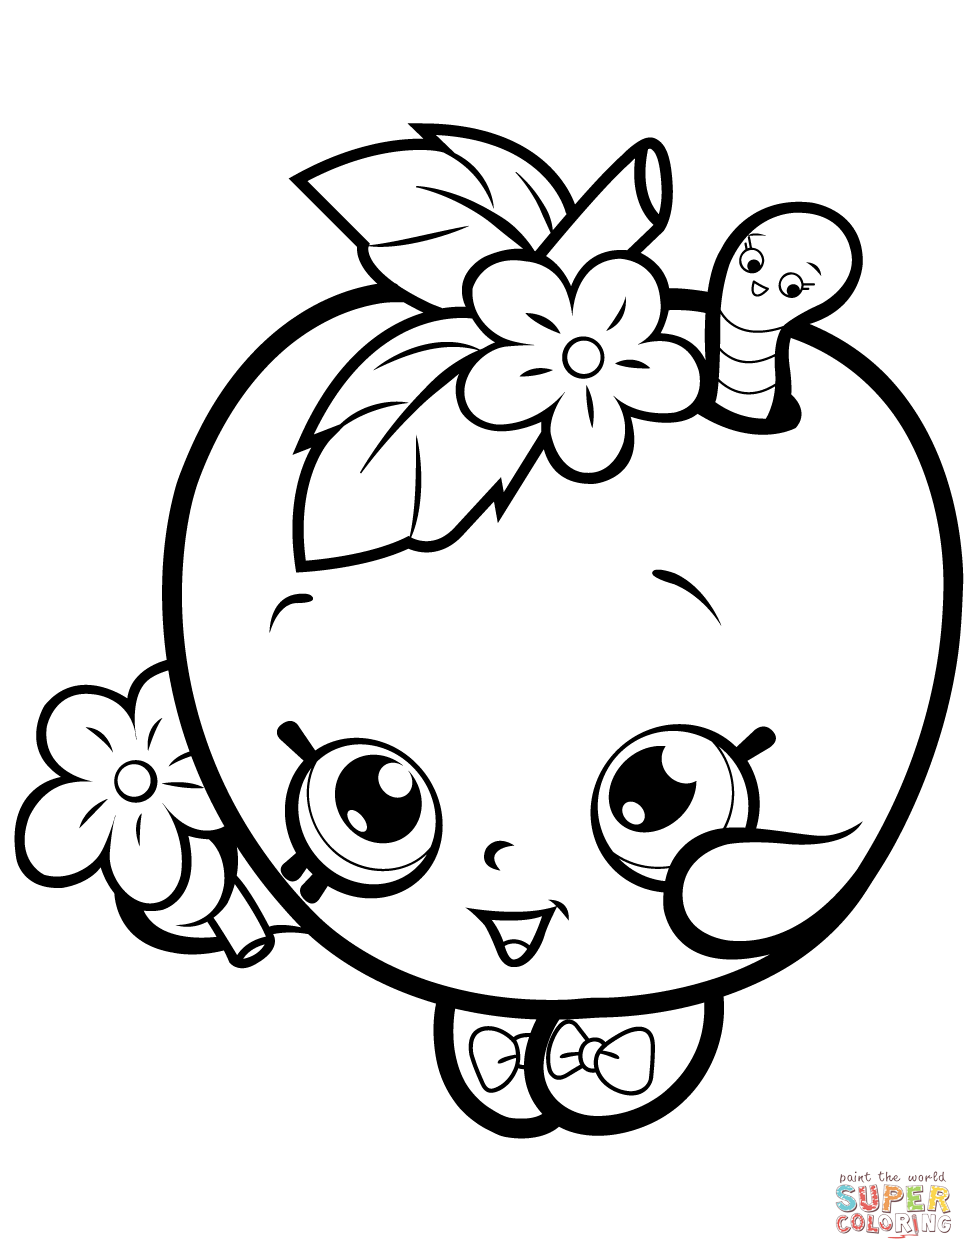 Apple Blossom coloring #10, Download drawings